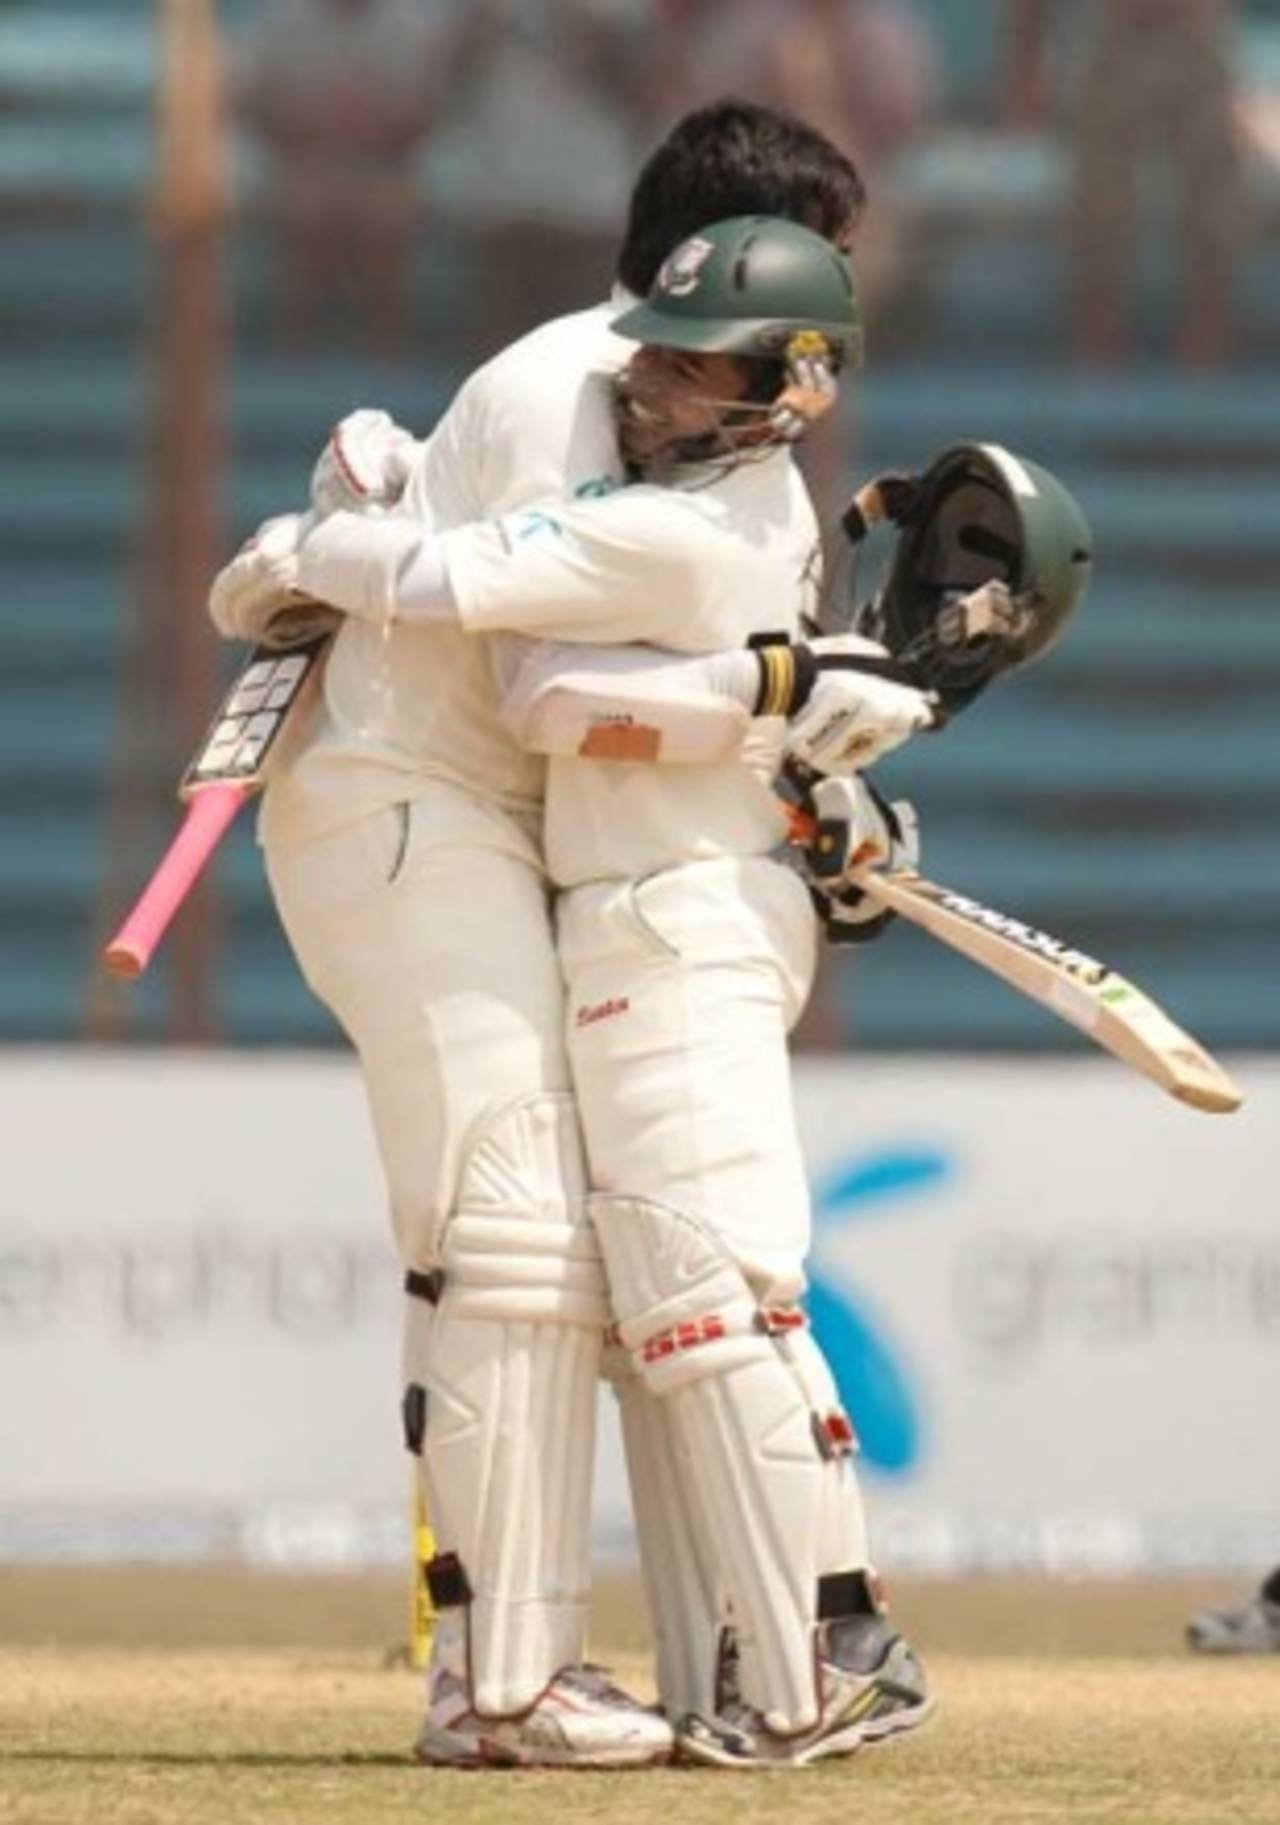 Mushfiqur Rahim hugged Junaid Siddique after the left-hander reached his ton - but missed out on bringing up his own century when he was bowled for 95&nbsp;&nbsp;&bull;&nbsp;&nbsp;PA Photos